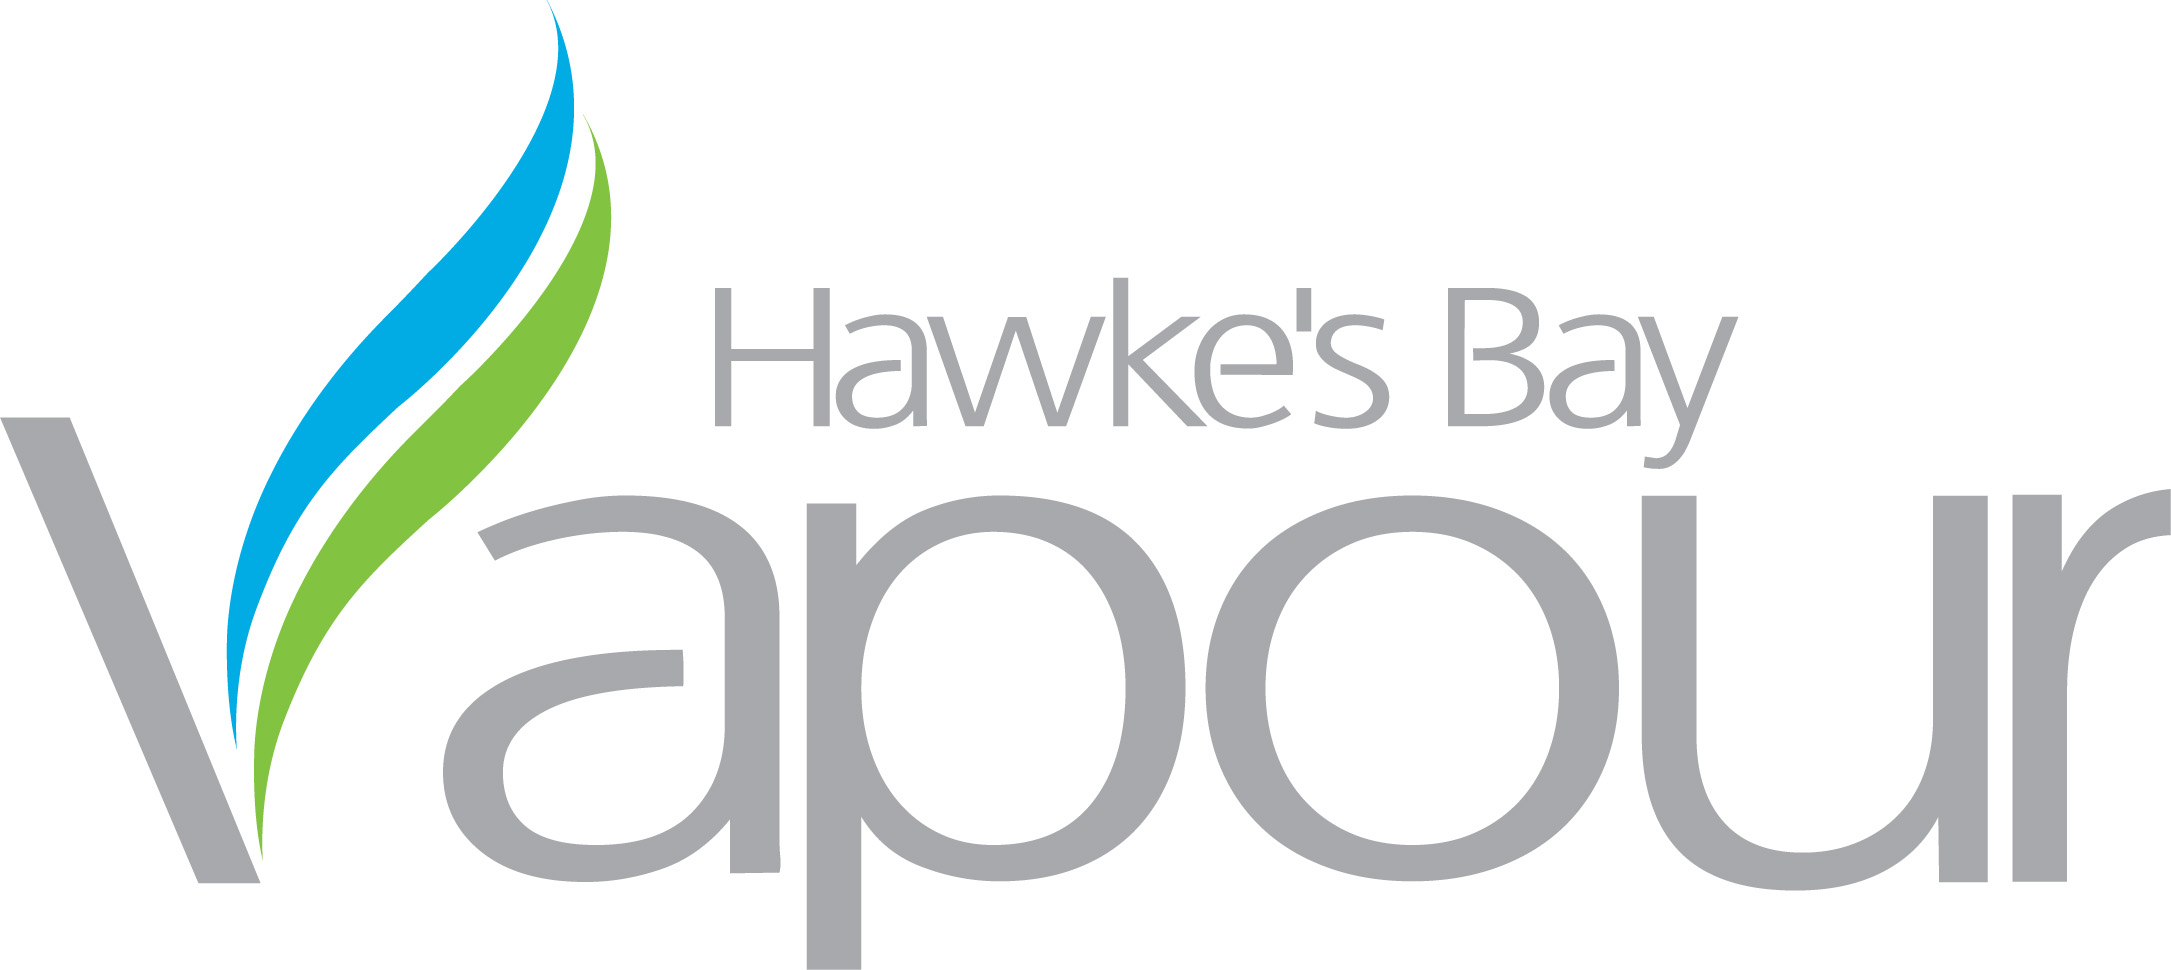 Business logo for Hawke's Bay Vapour